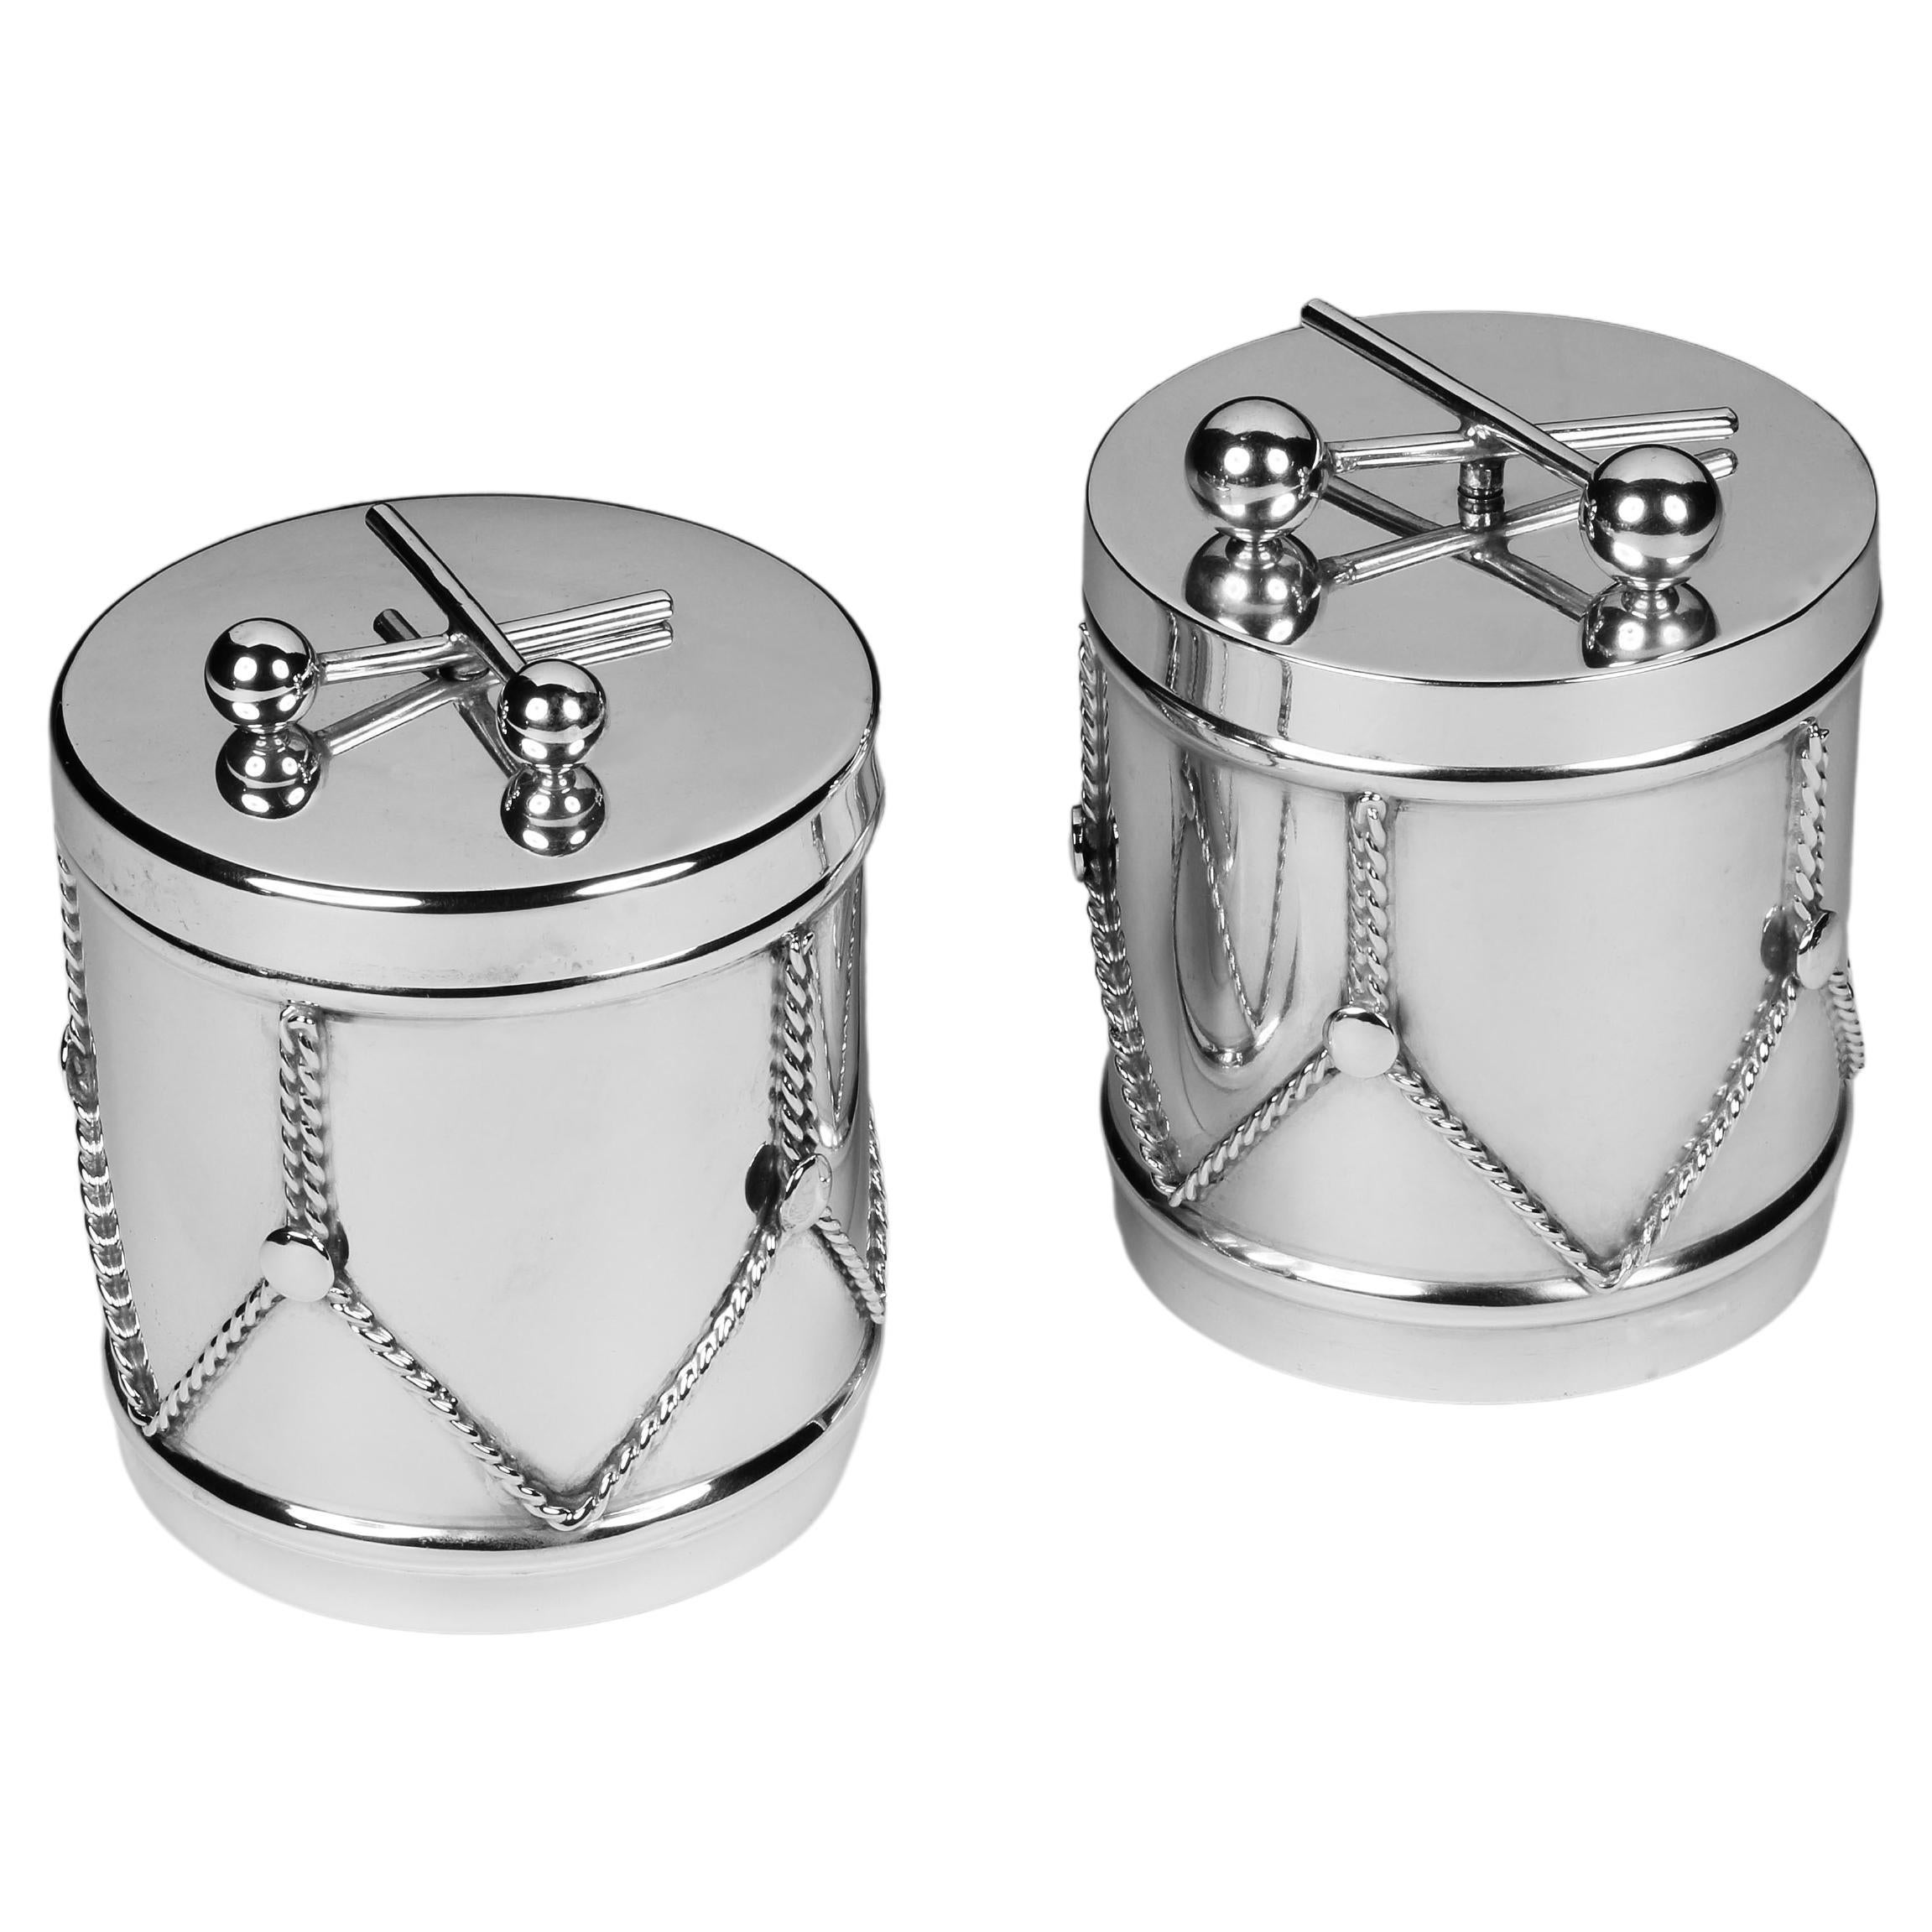 Sterling Silver 'Drum' Boxes by Cartier, New York, circa 1940s